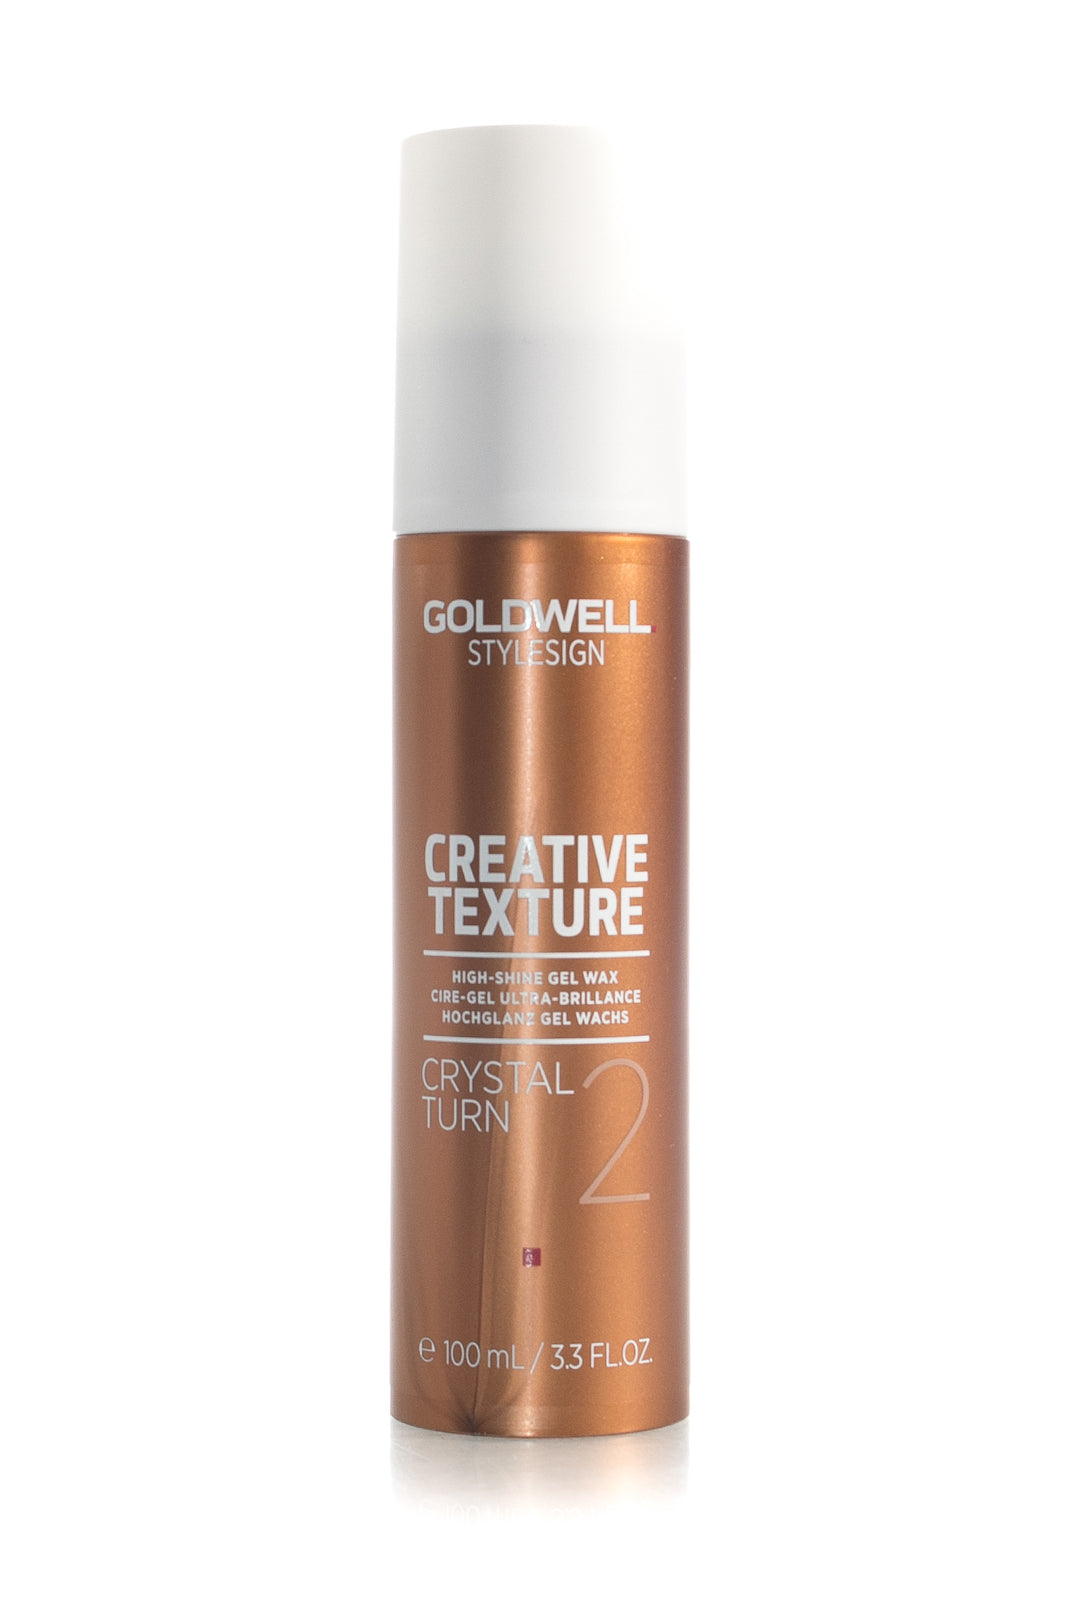 Product Image: Goldwell Creative Texture Crystal Turn - 100ml